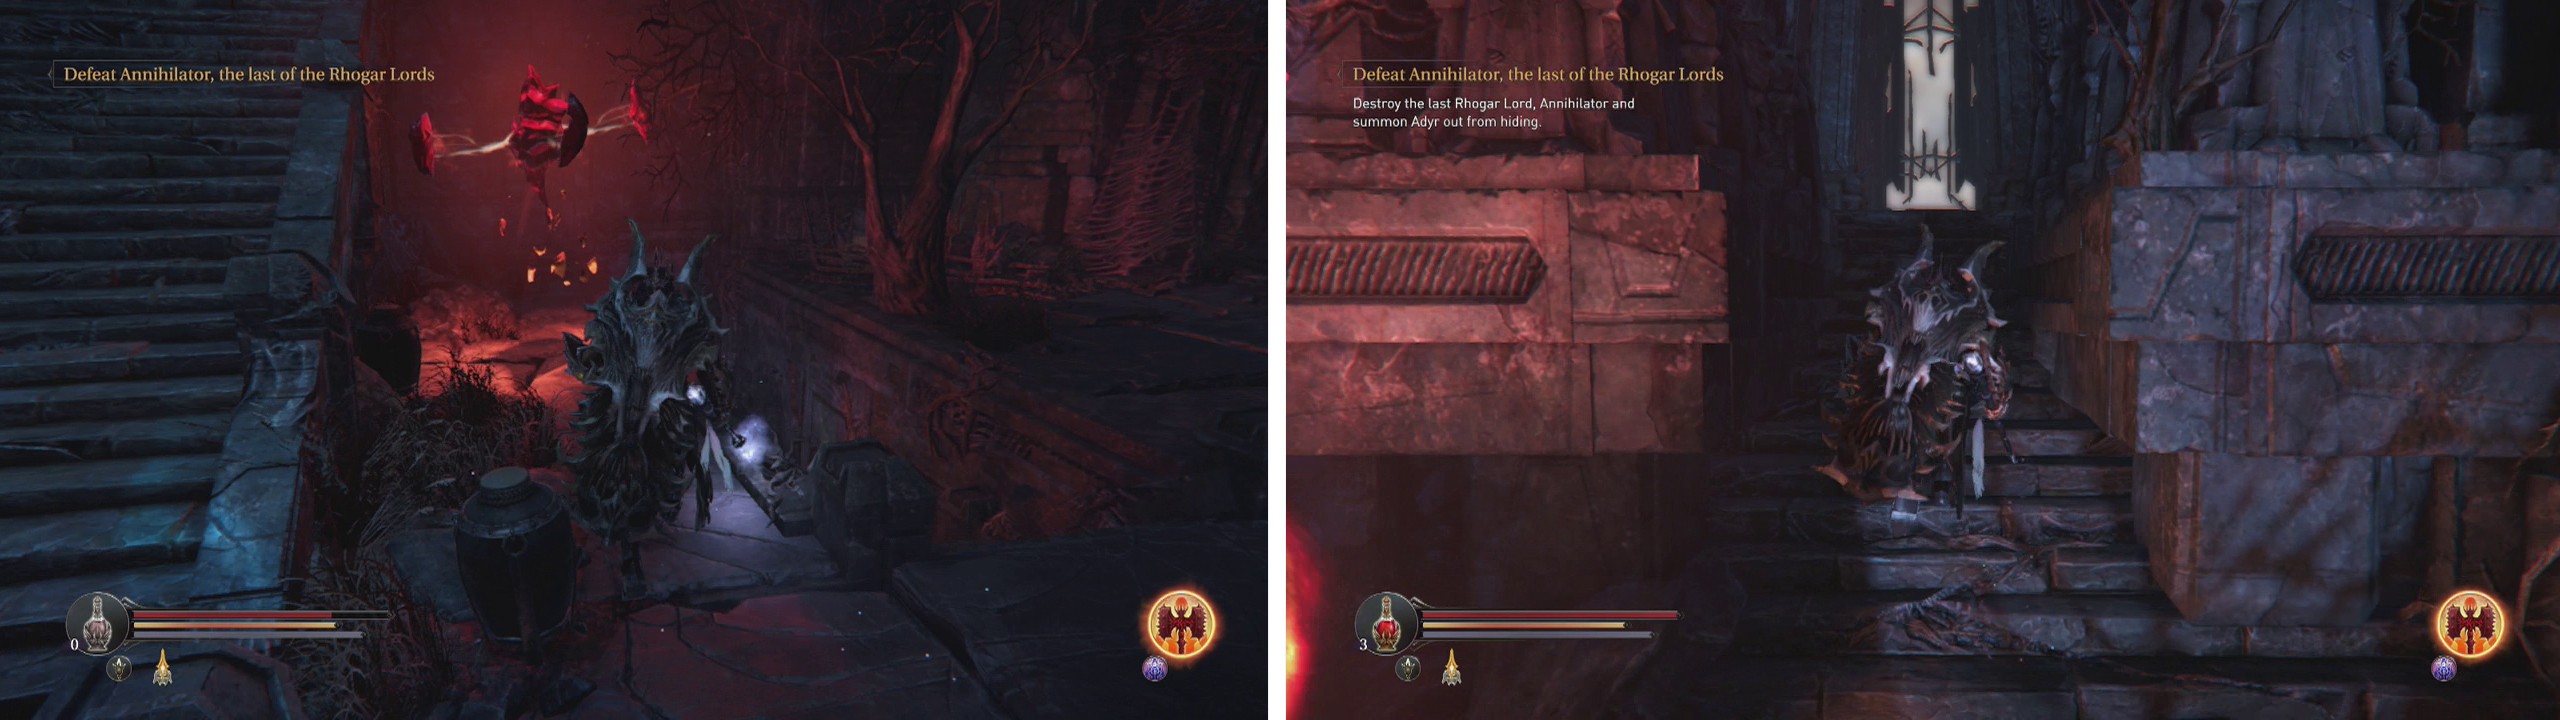 Use the Checkpoint Crystal nearby (left) before climbing the stairs to fight the Annihilator (right).